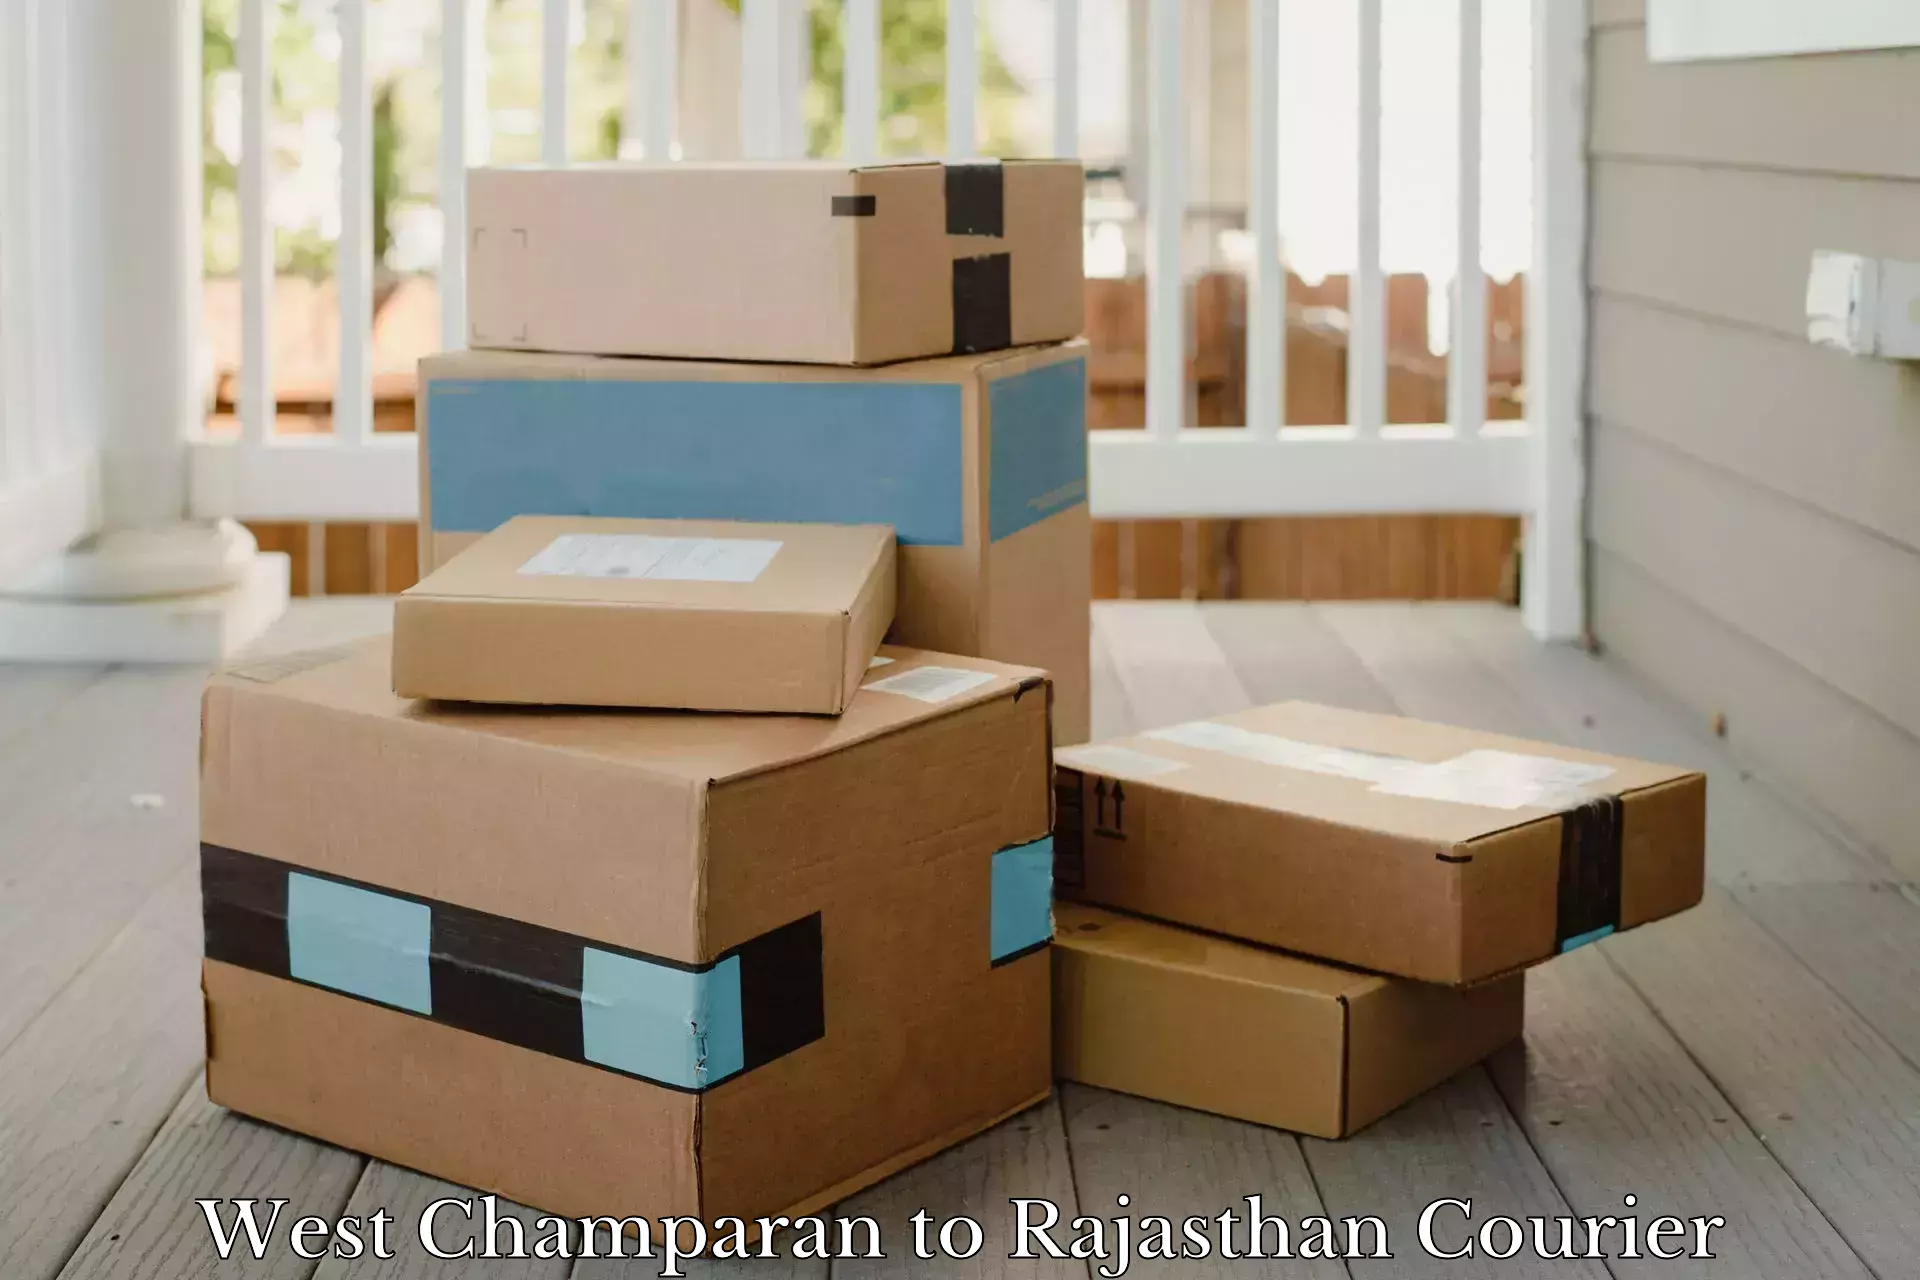 Full-service courier options West Champaran to Deogarh Rajsamand